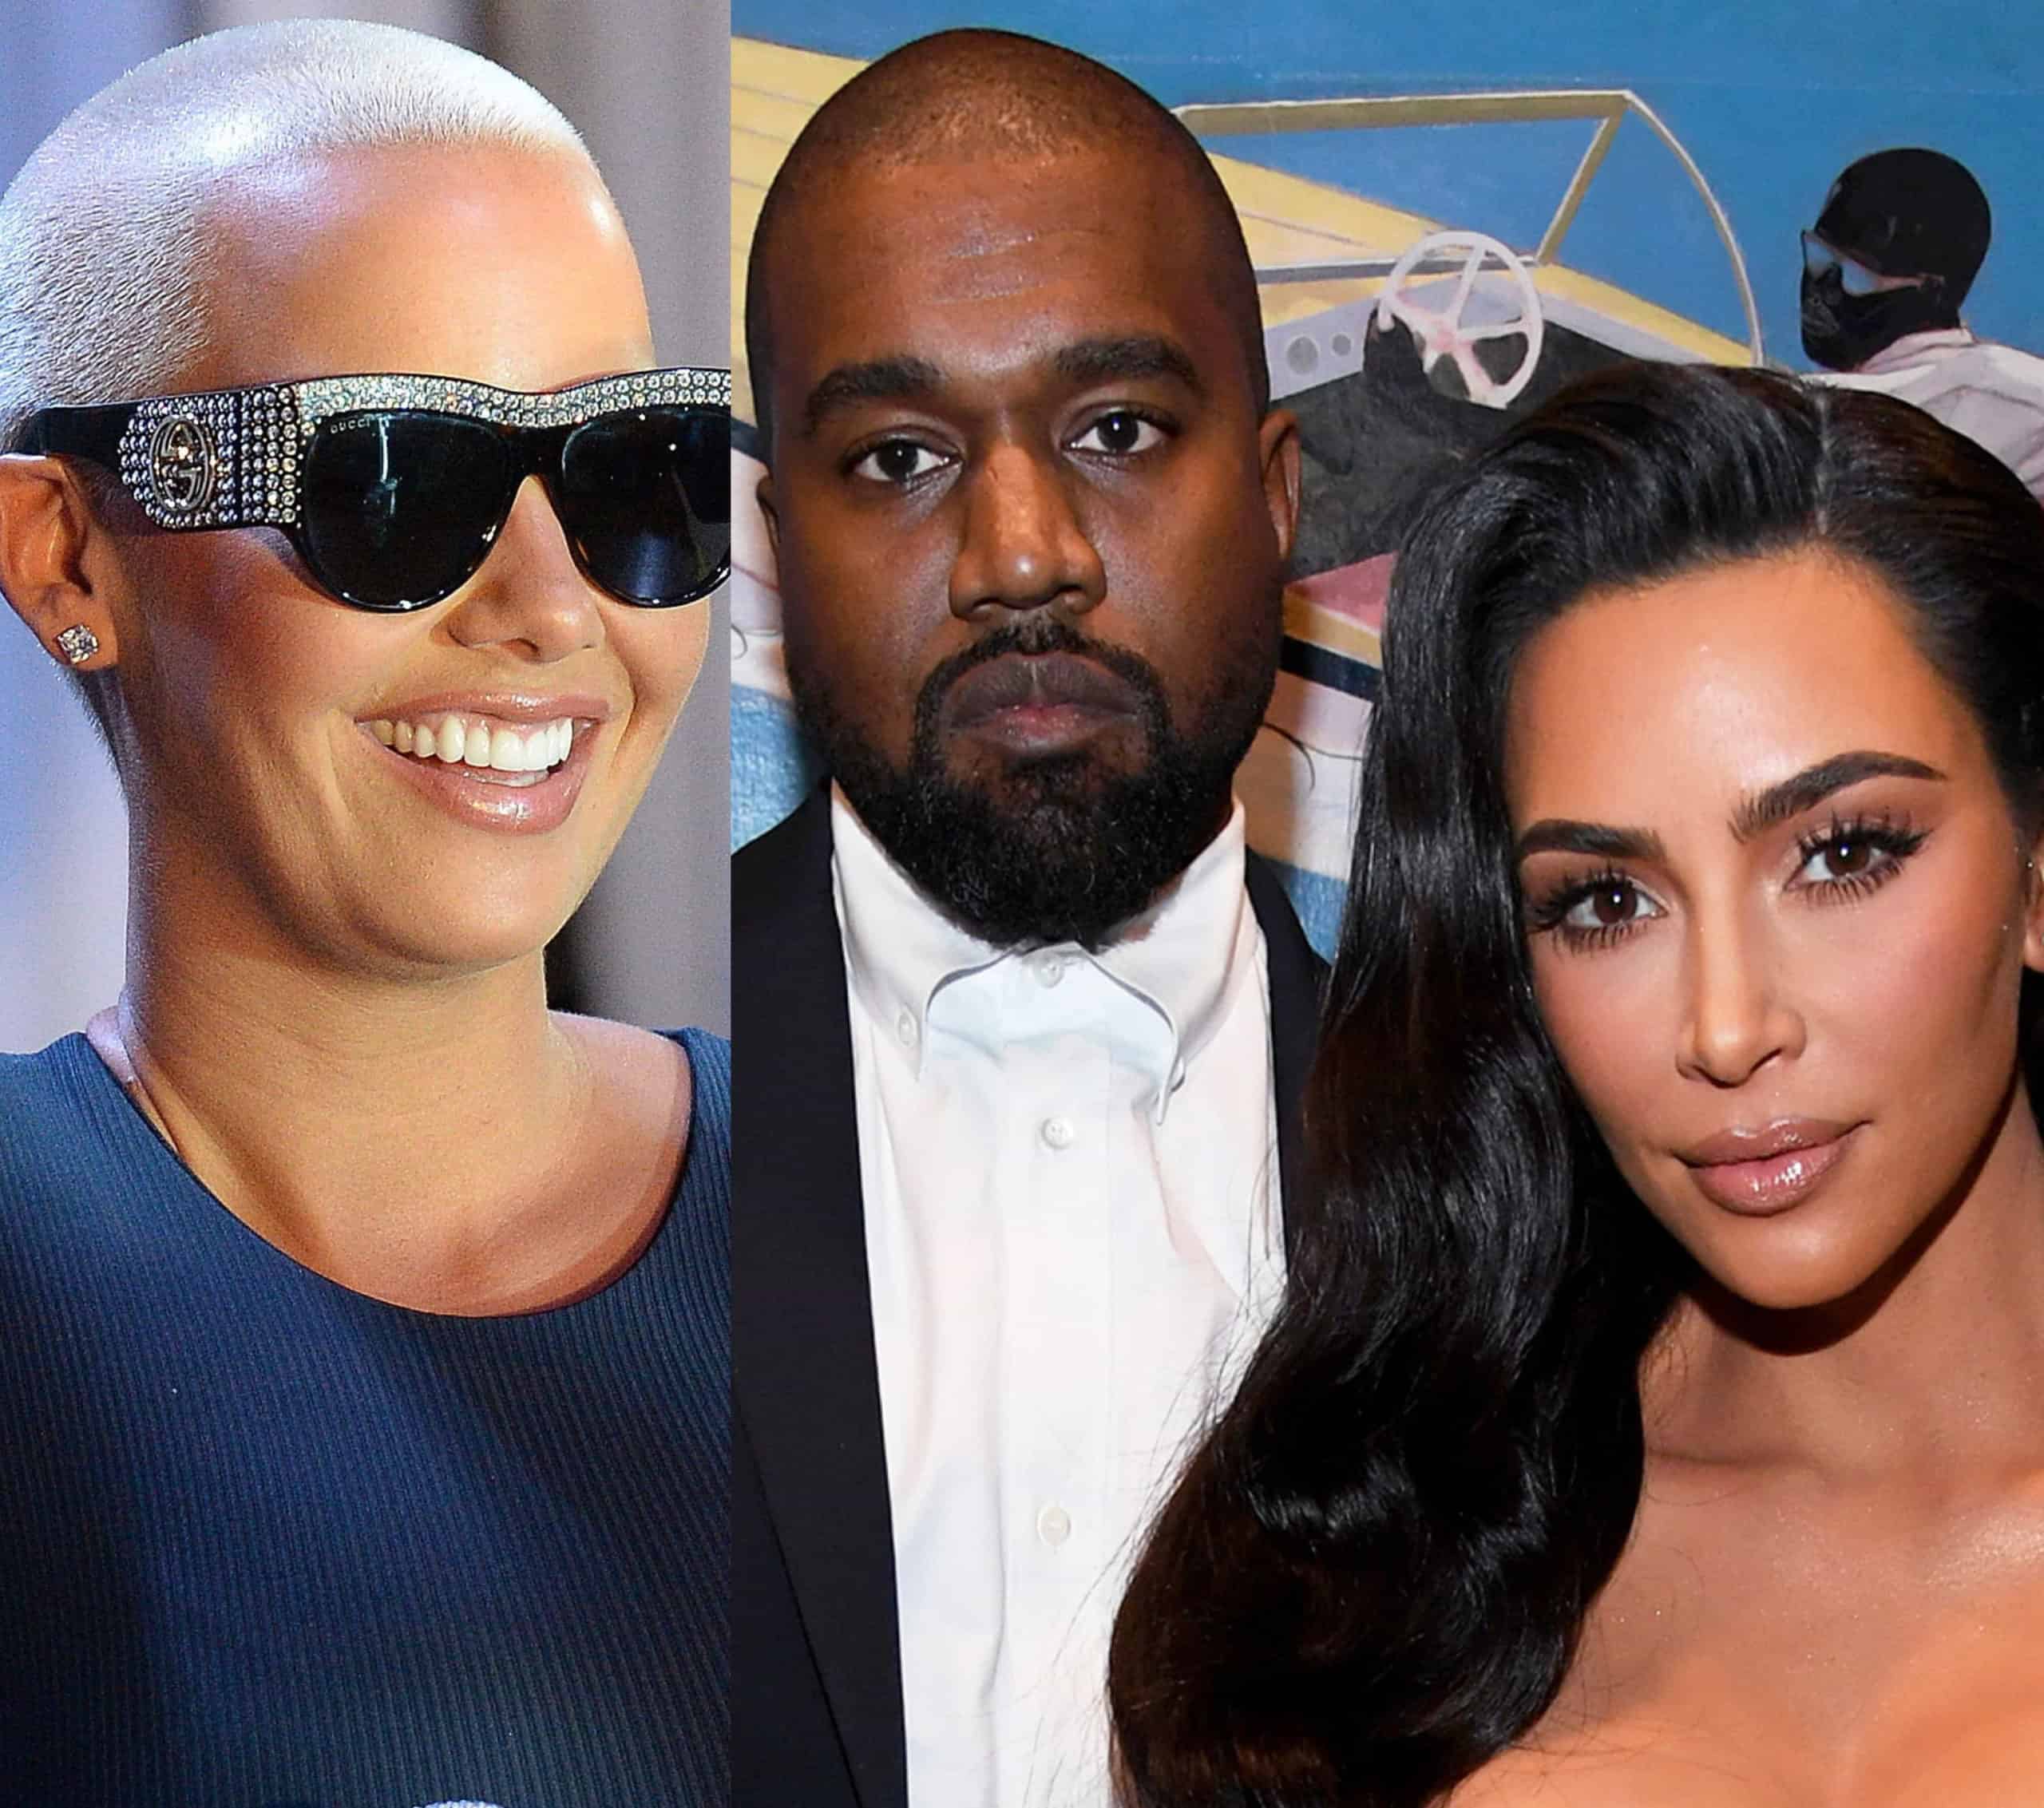 Amber Rose Reacts To Her Prediction of Kanye West's Humiliation From Kardashians